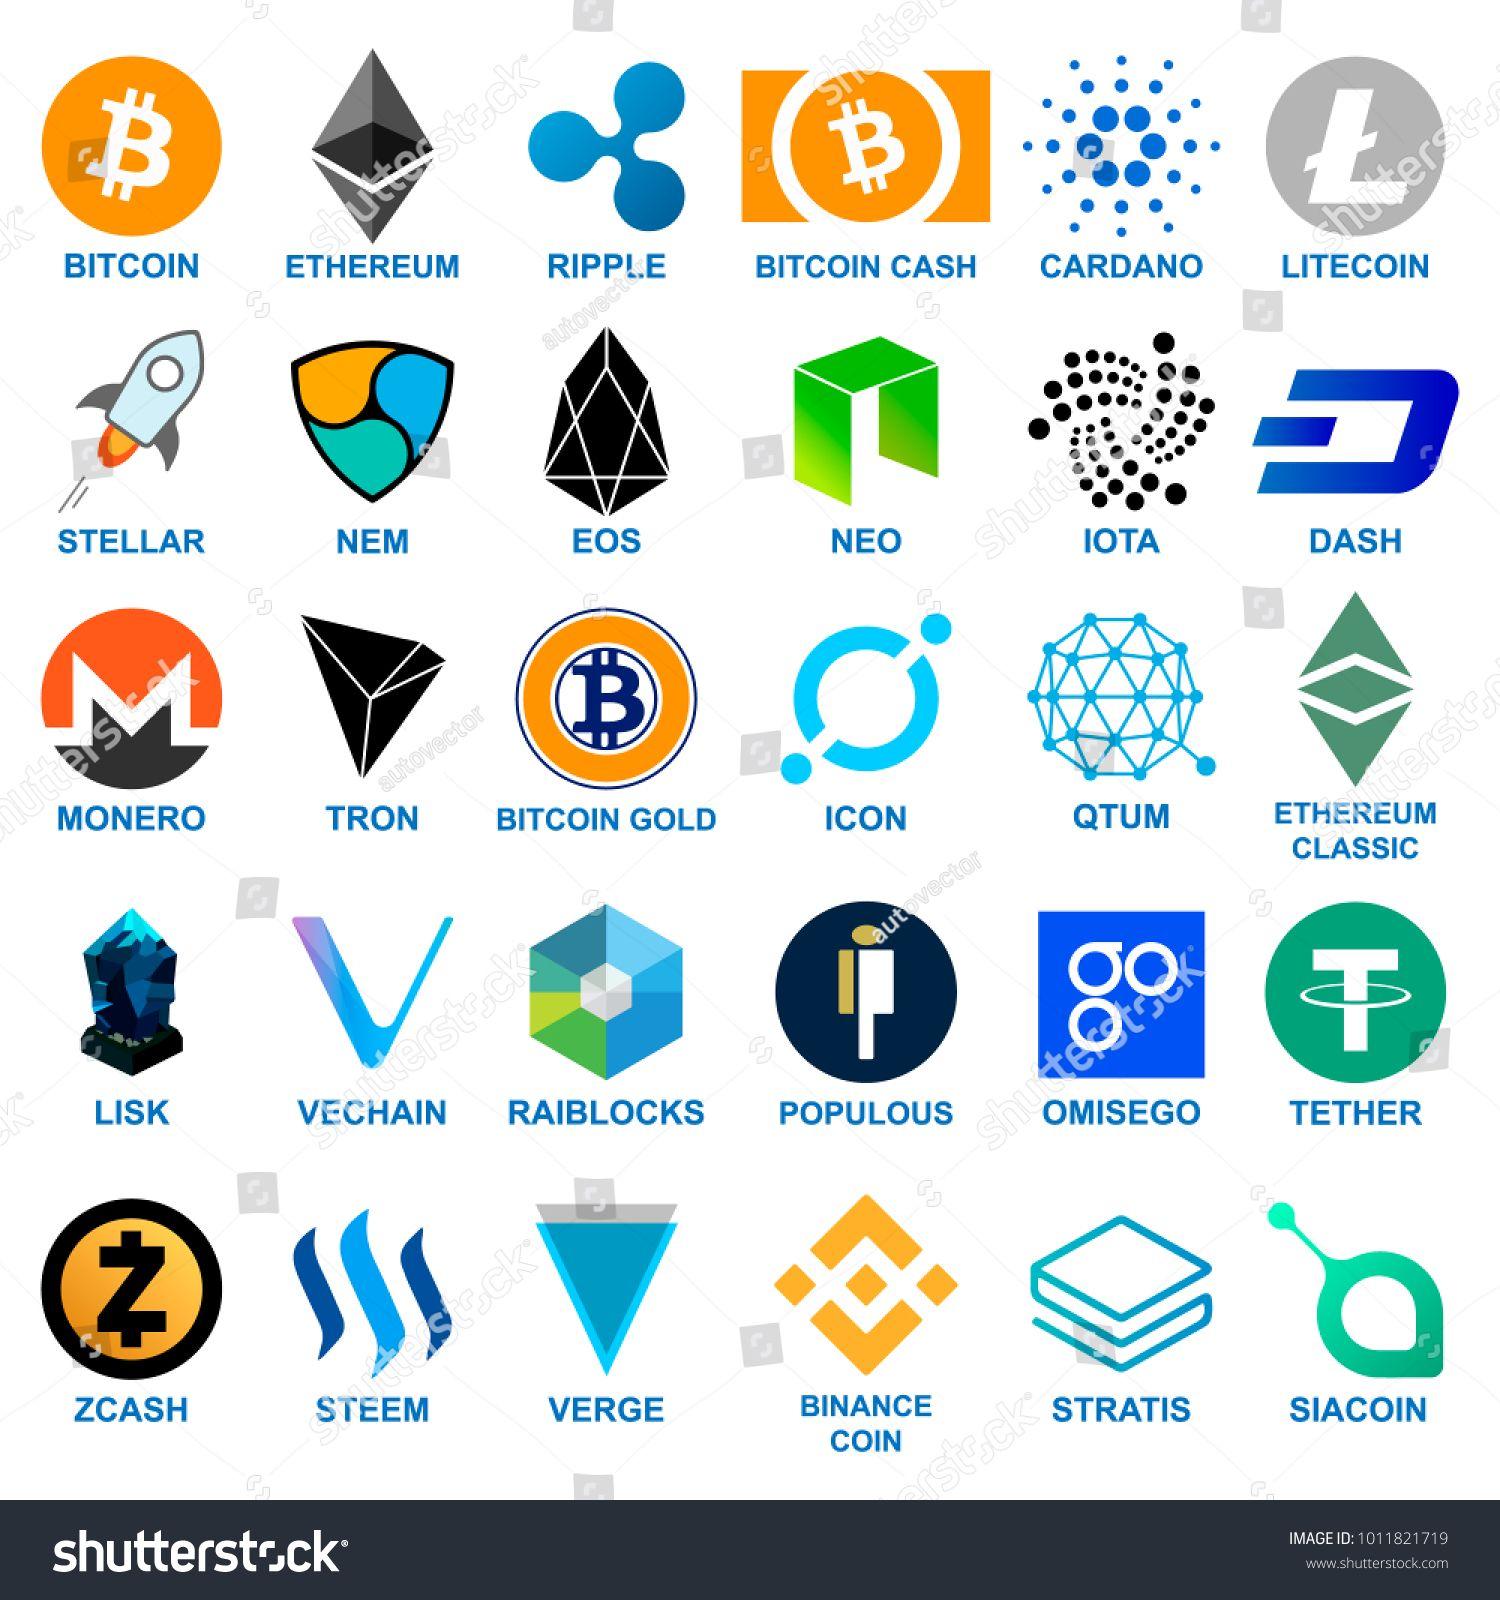 Cryptocoin Logo - Cryptocurrency logo set. | Crypto Culture in 2019 | Cryptocurrency ...